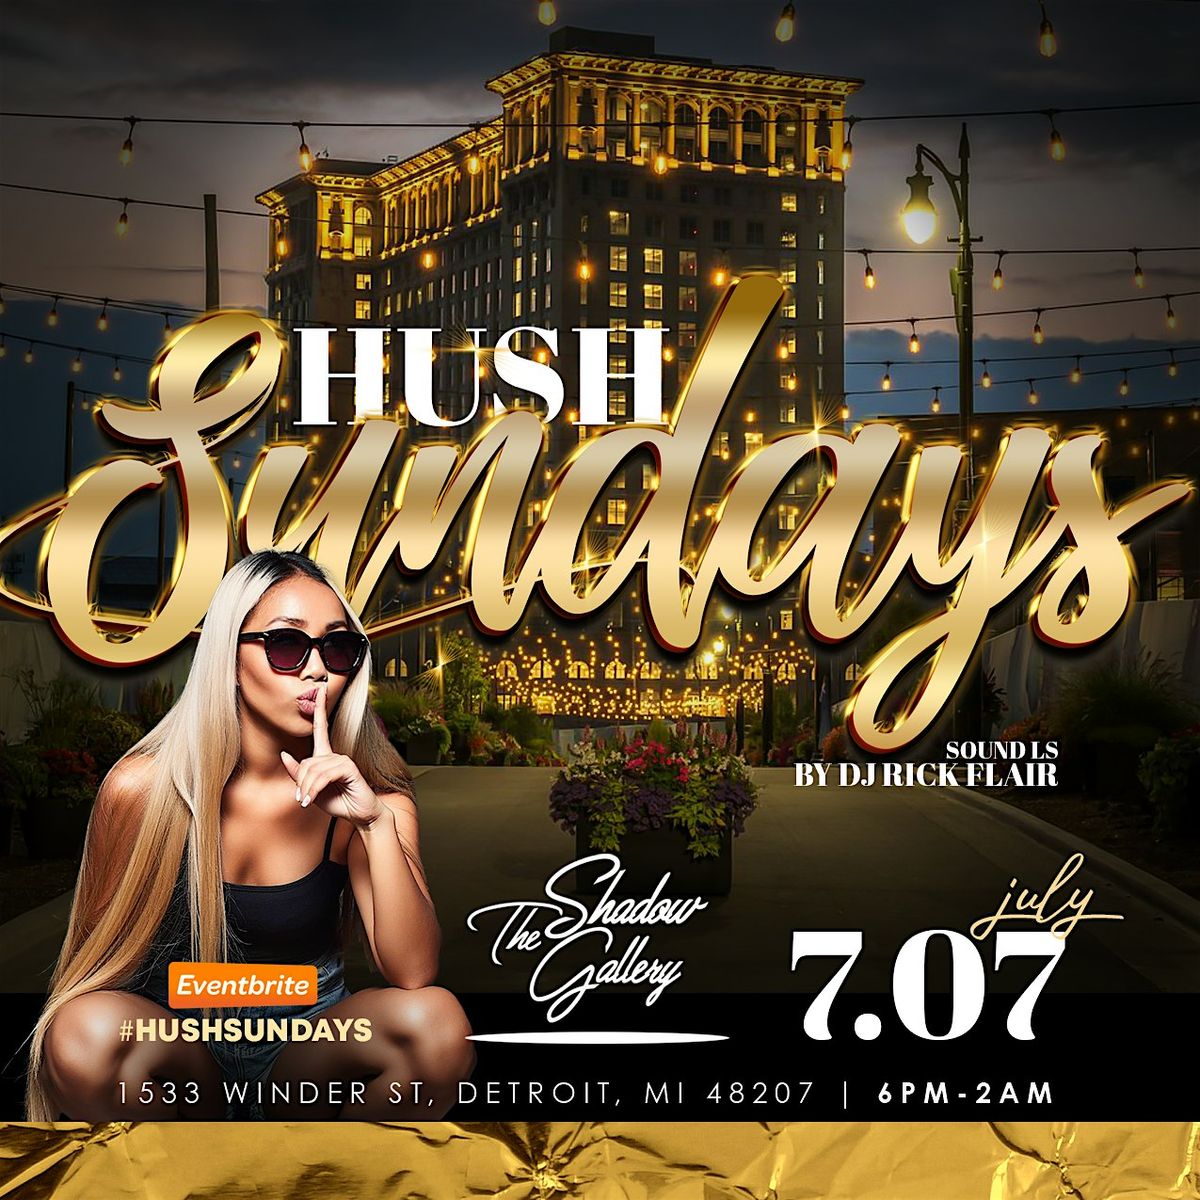 HUSH SUNDAYS CANCER EDITION (INSIDE AND OUT) ROOF TOP BANGER (6PM-2AM)